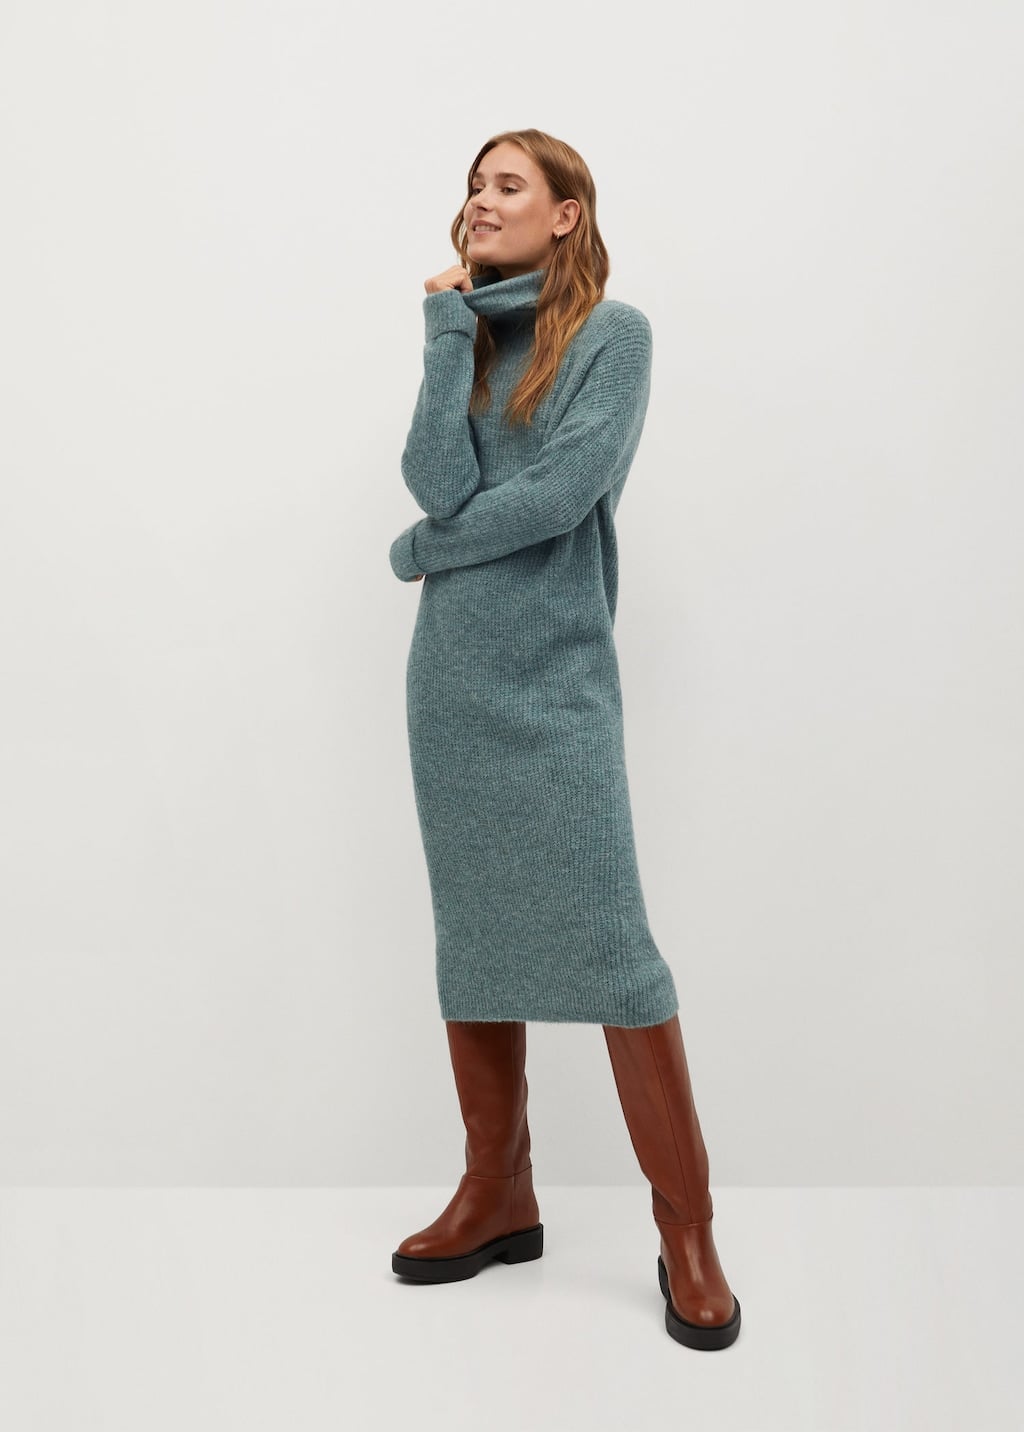 5 Jumper Dresses To Style This Winter, The 411